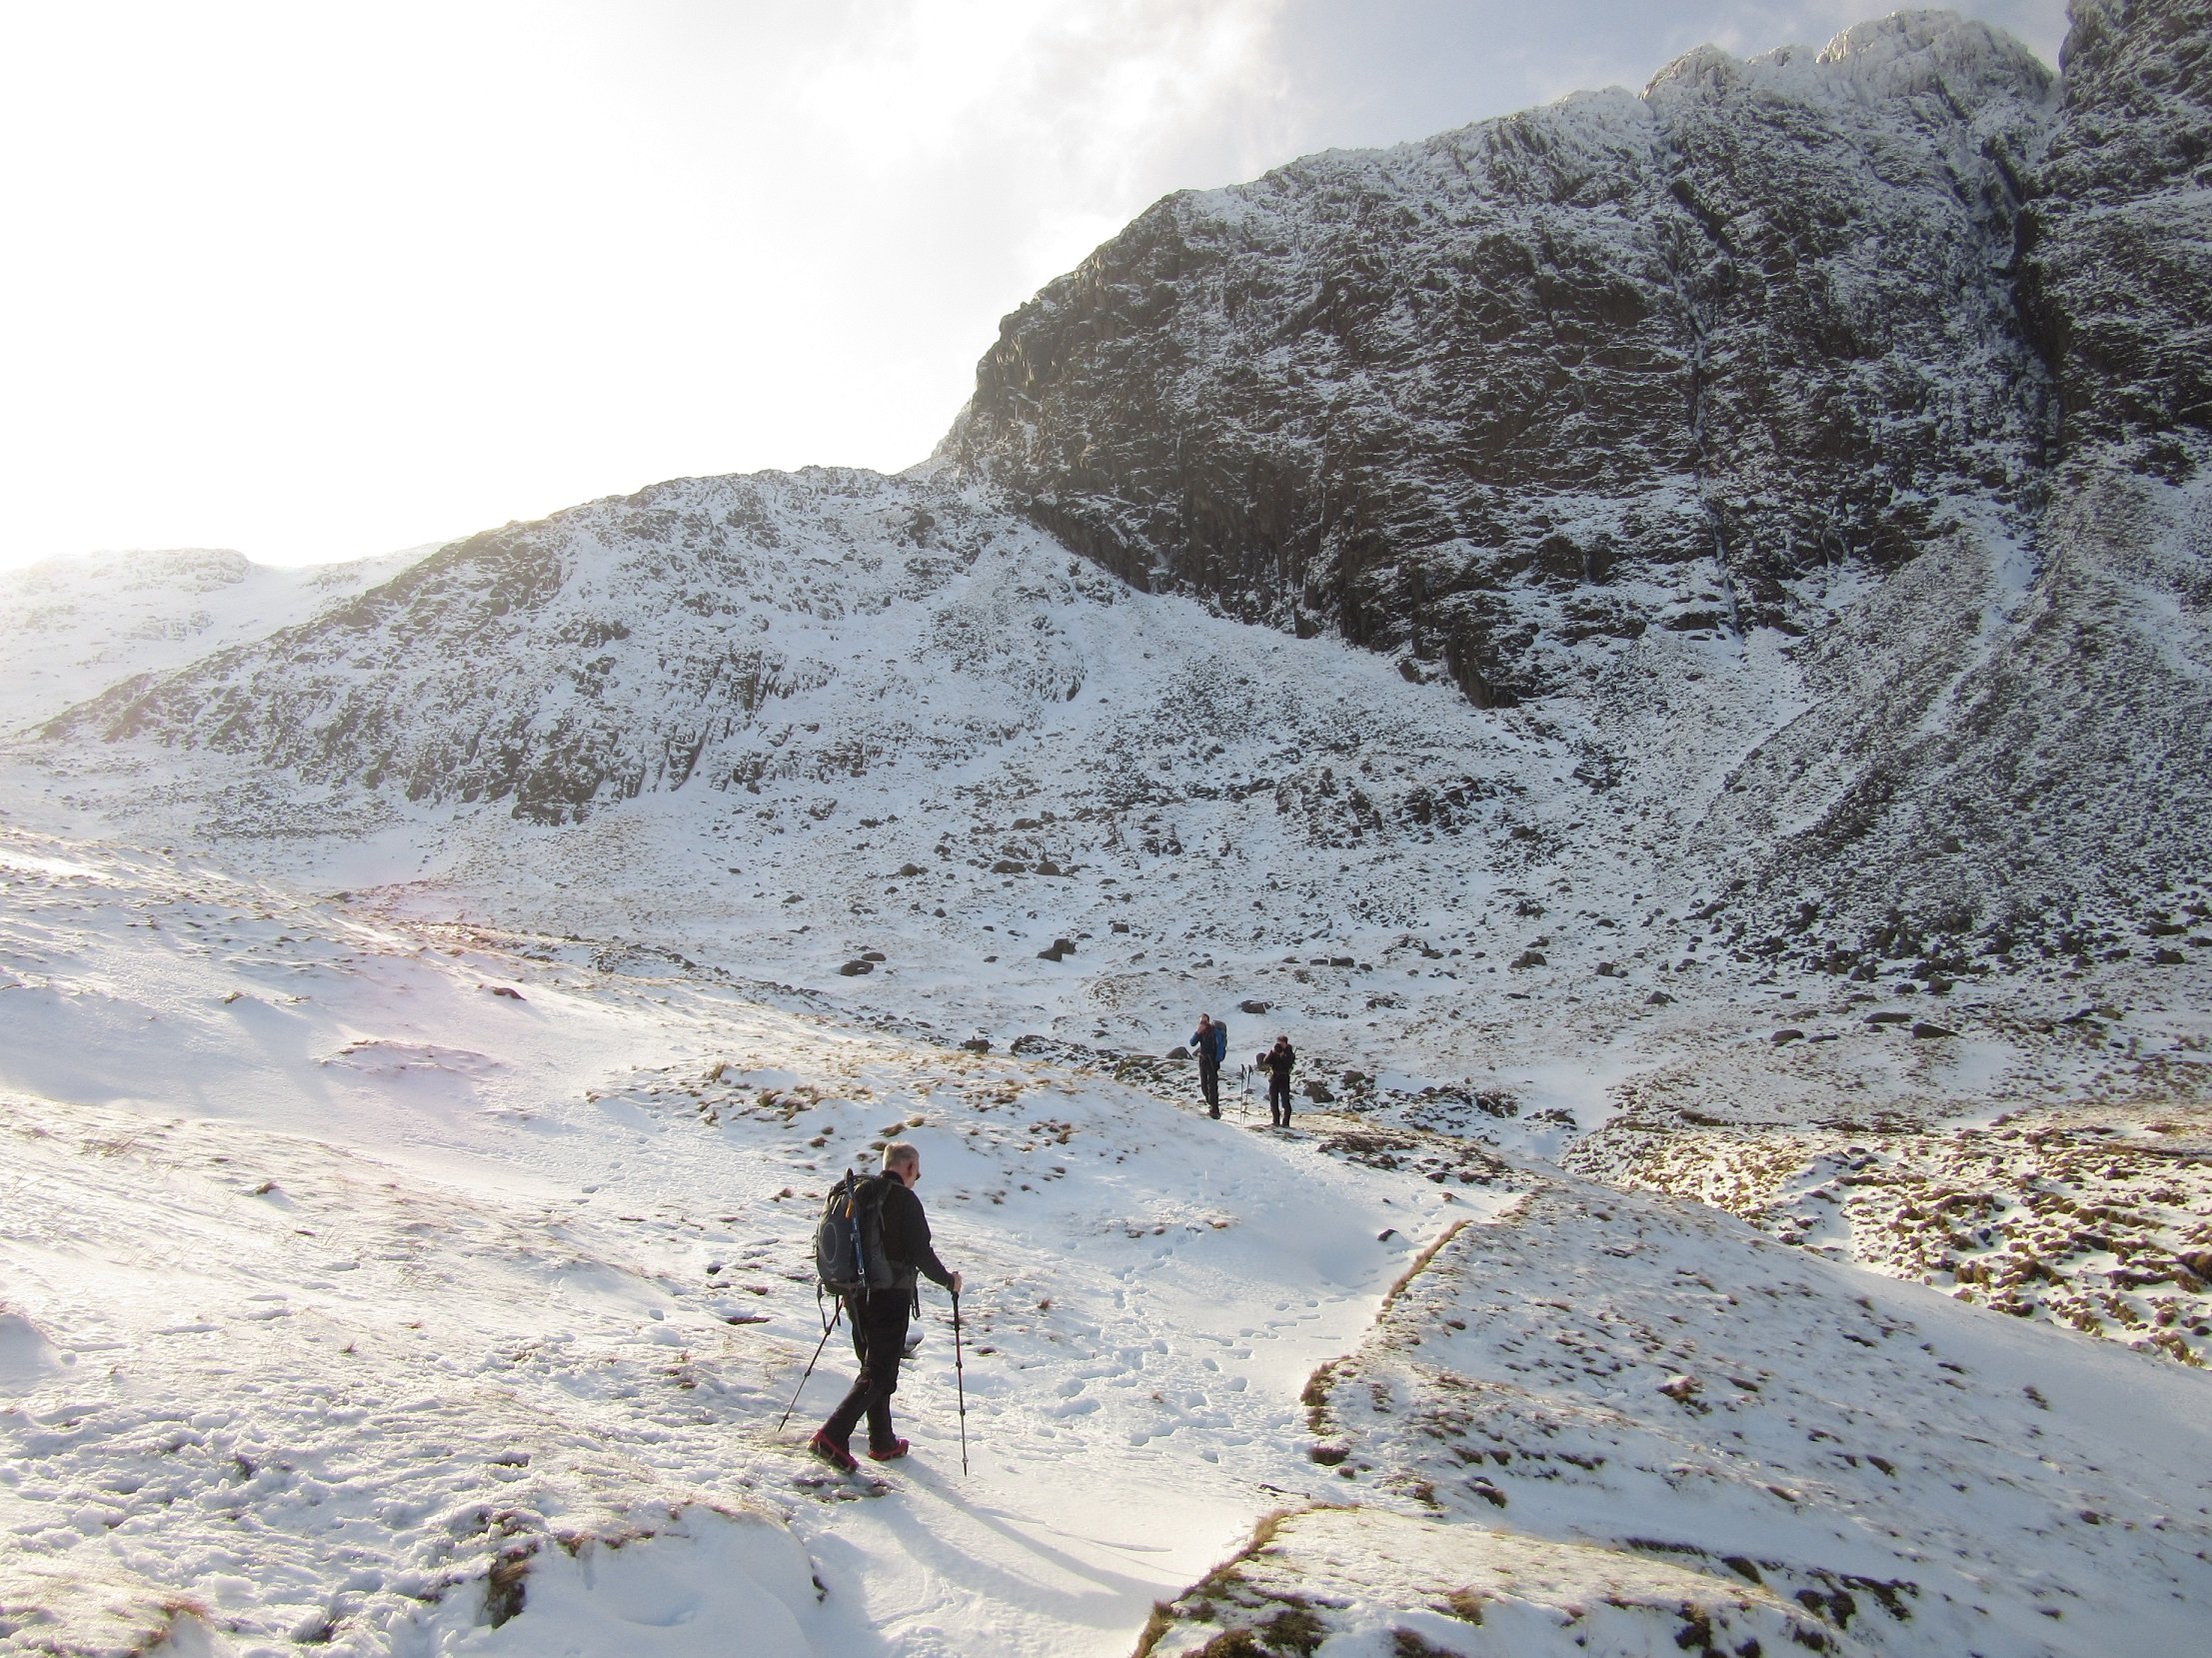 Hikers on the path up Scafell Pike from Borrowdale, on a snowy day.